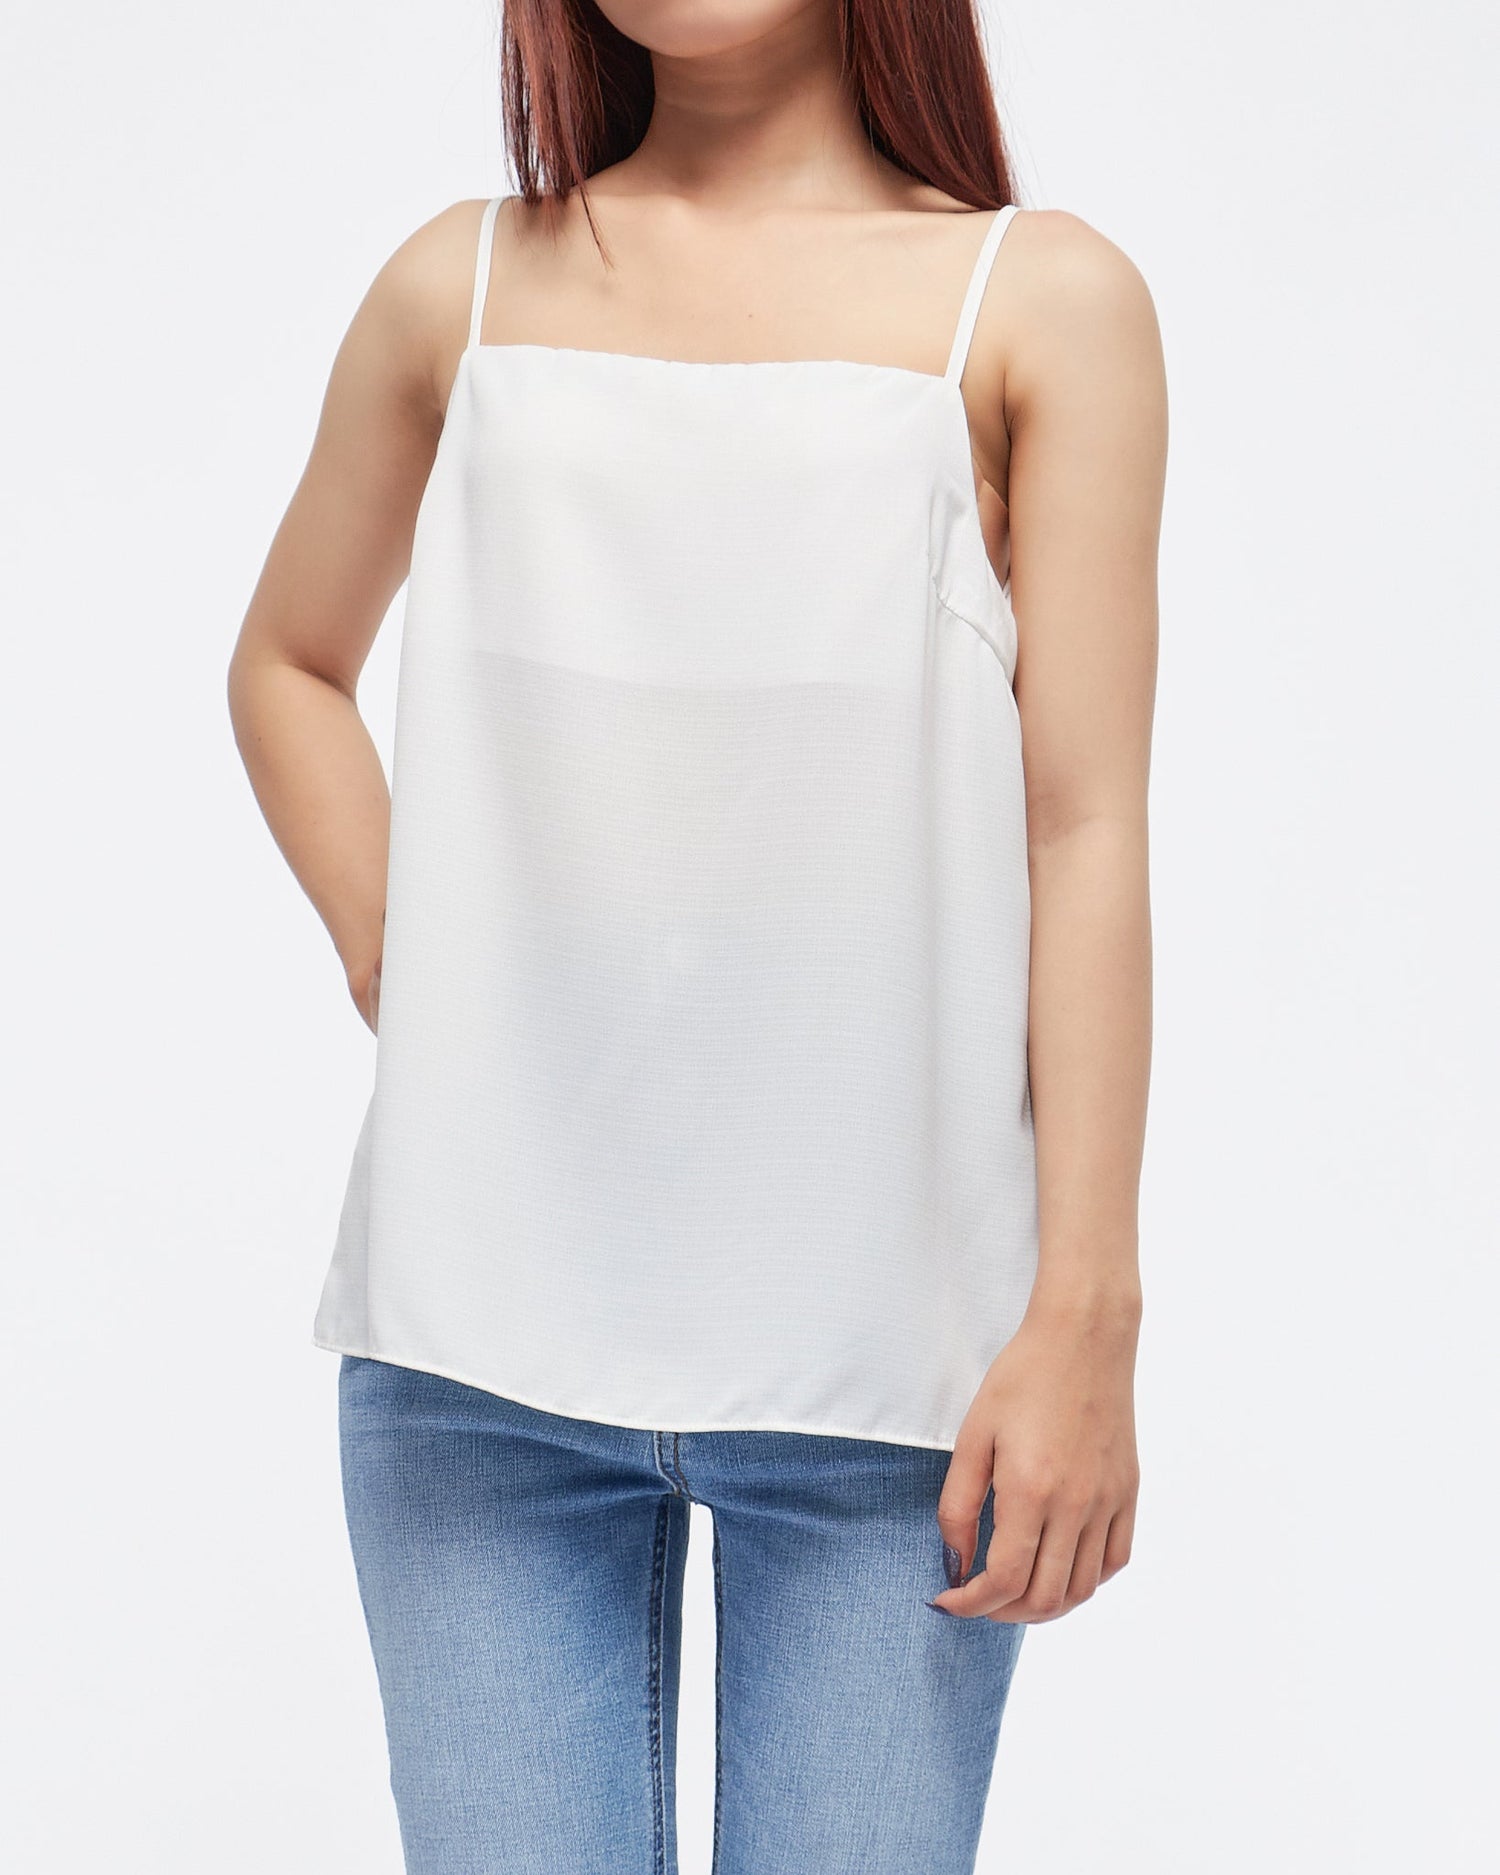 MOI OUTFIT-Plain Color Lady Top Sleeveless 14.50